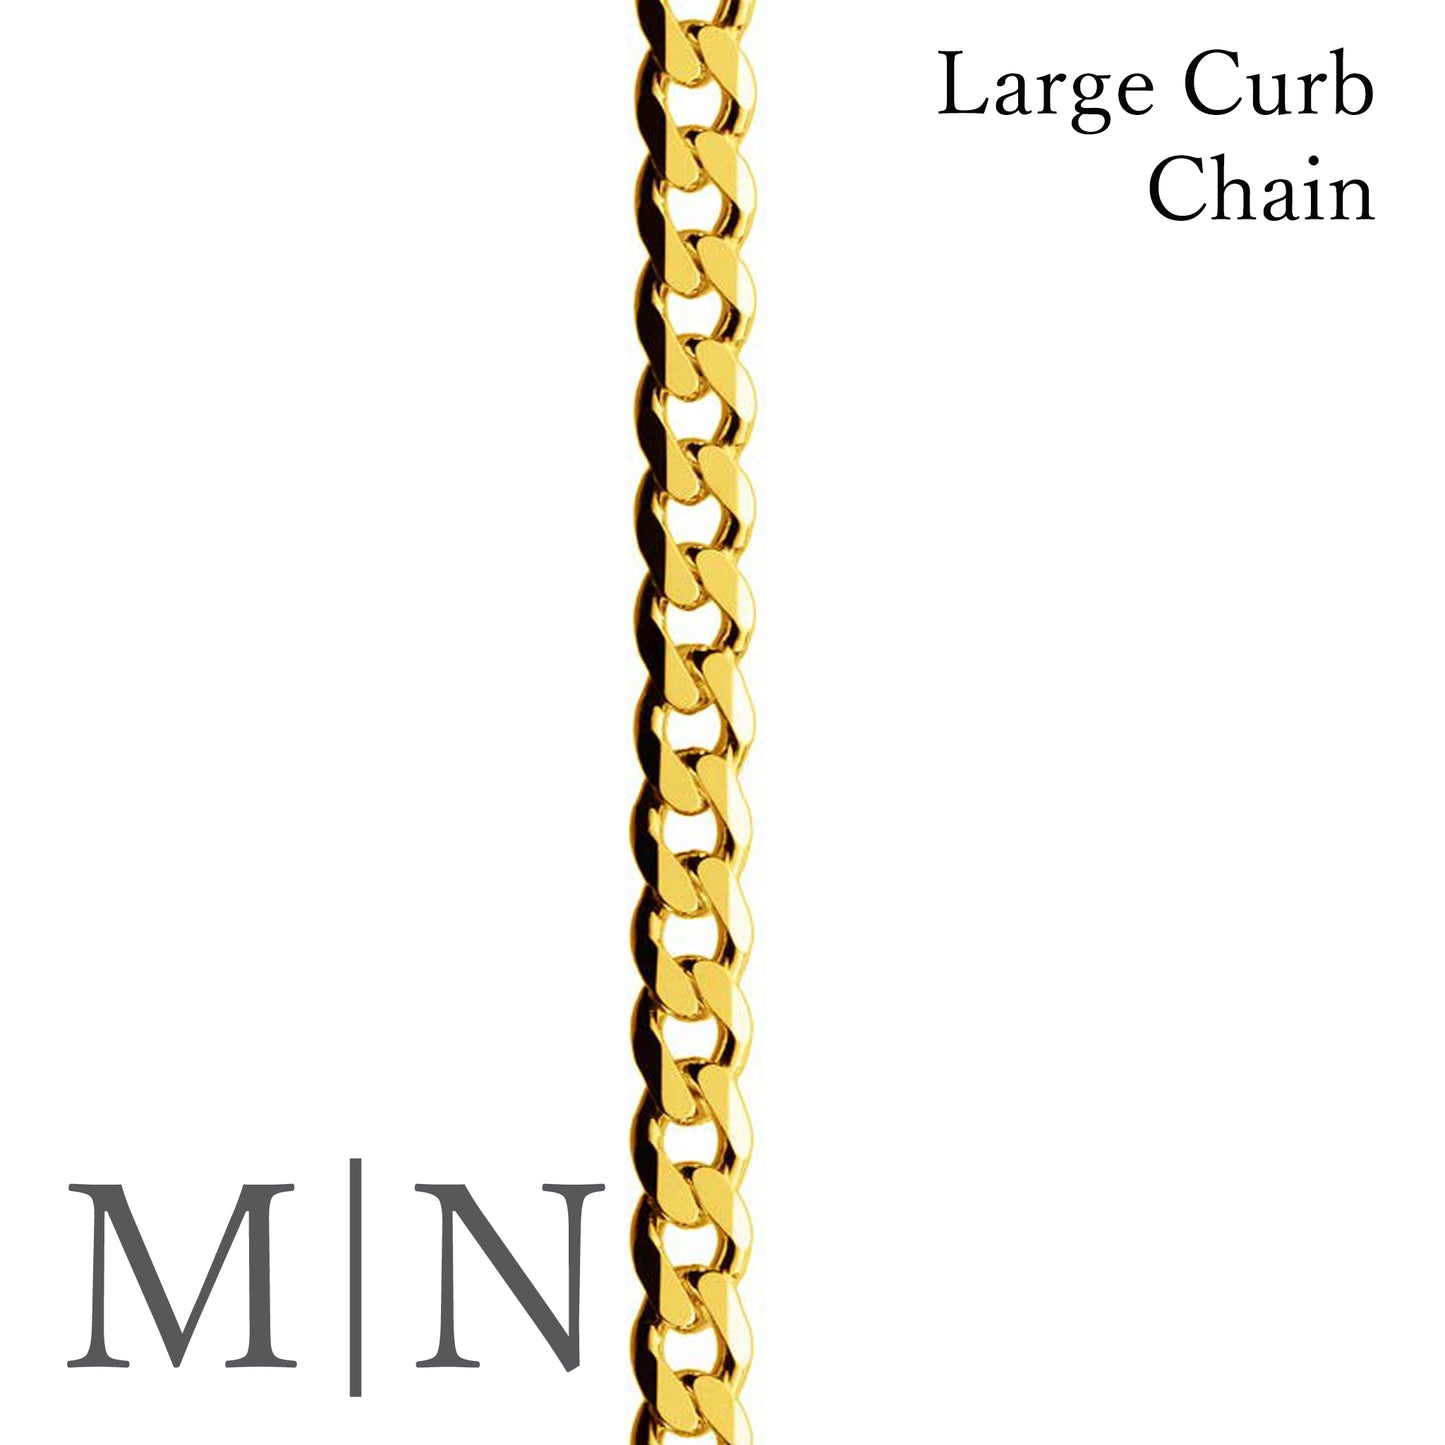 Large Curb Chains